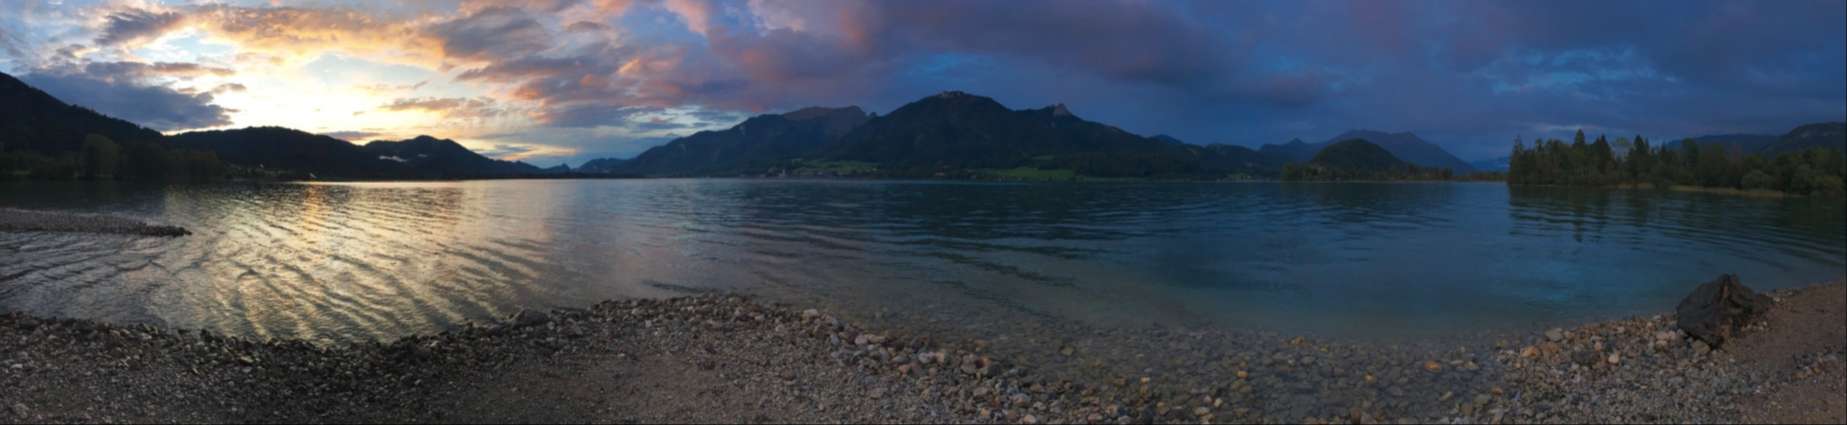 Wolfgangsee sunset panorama from a secret beach